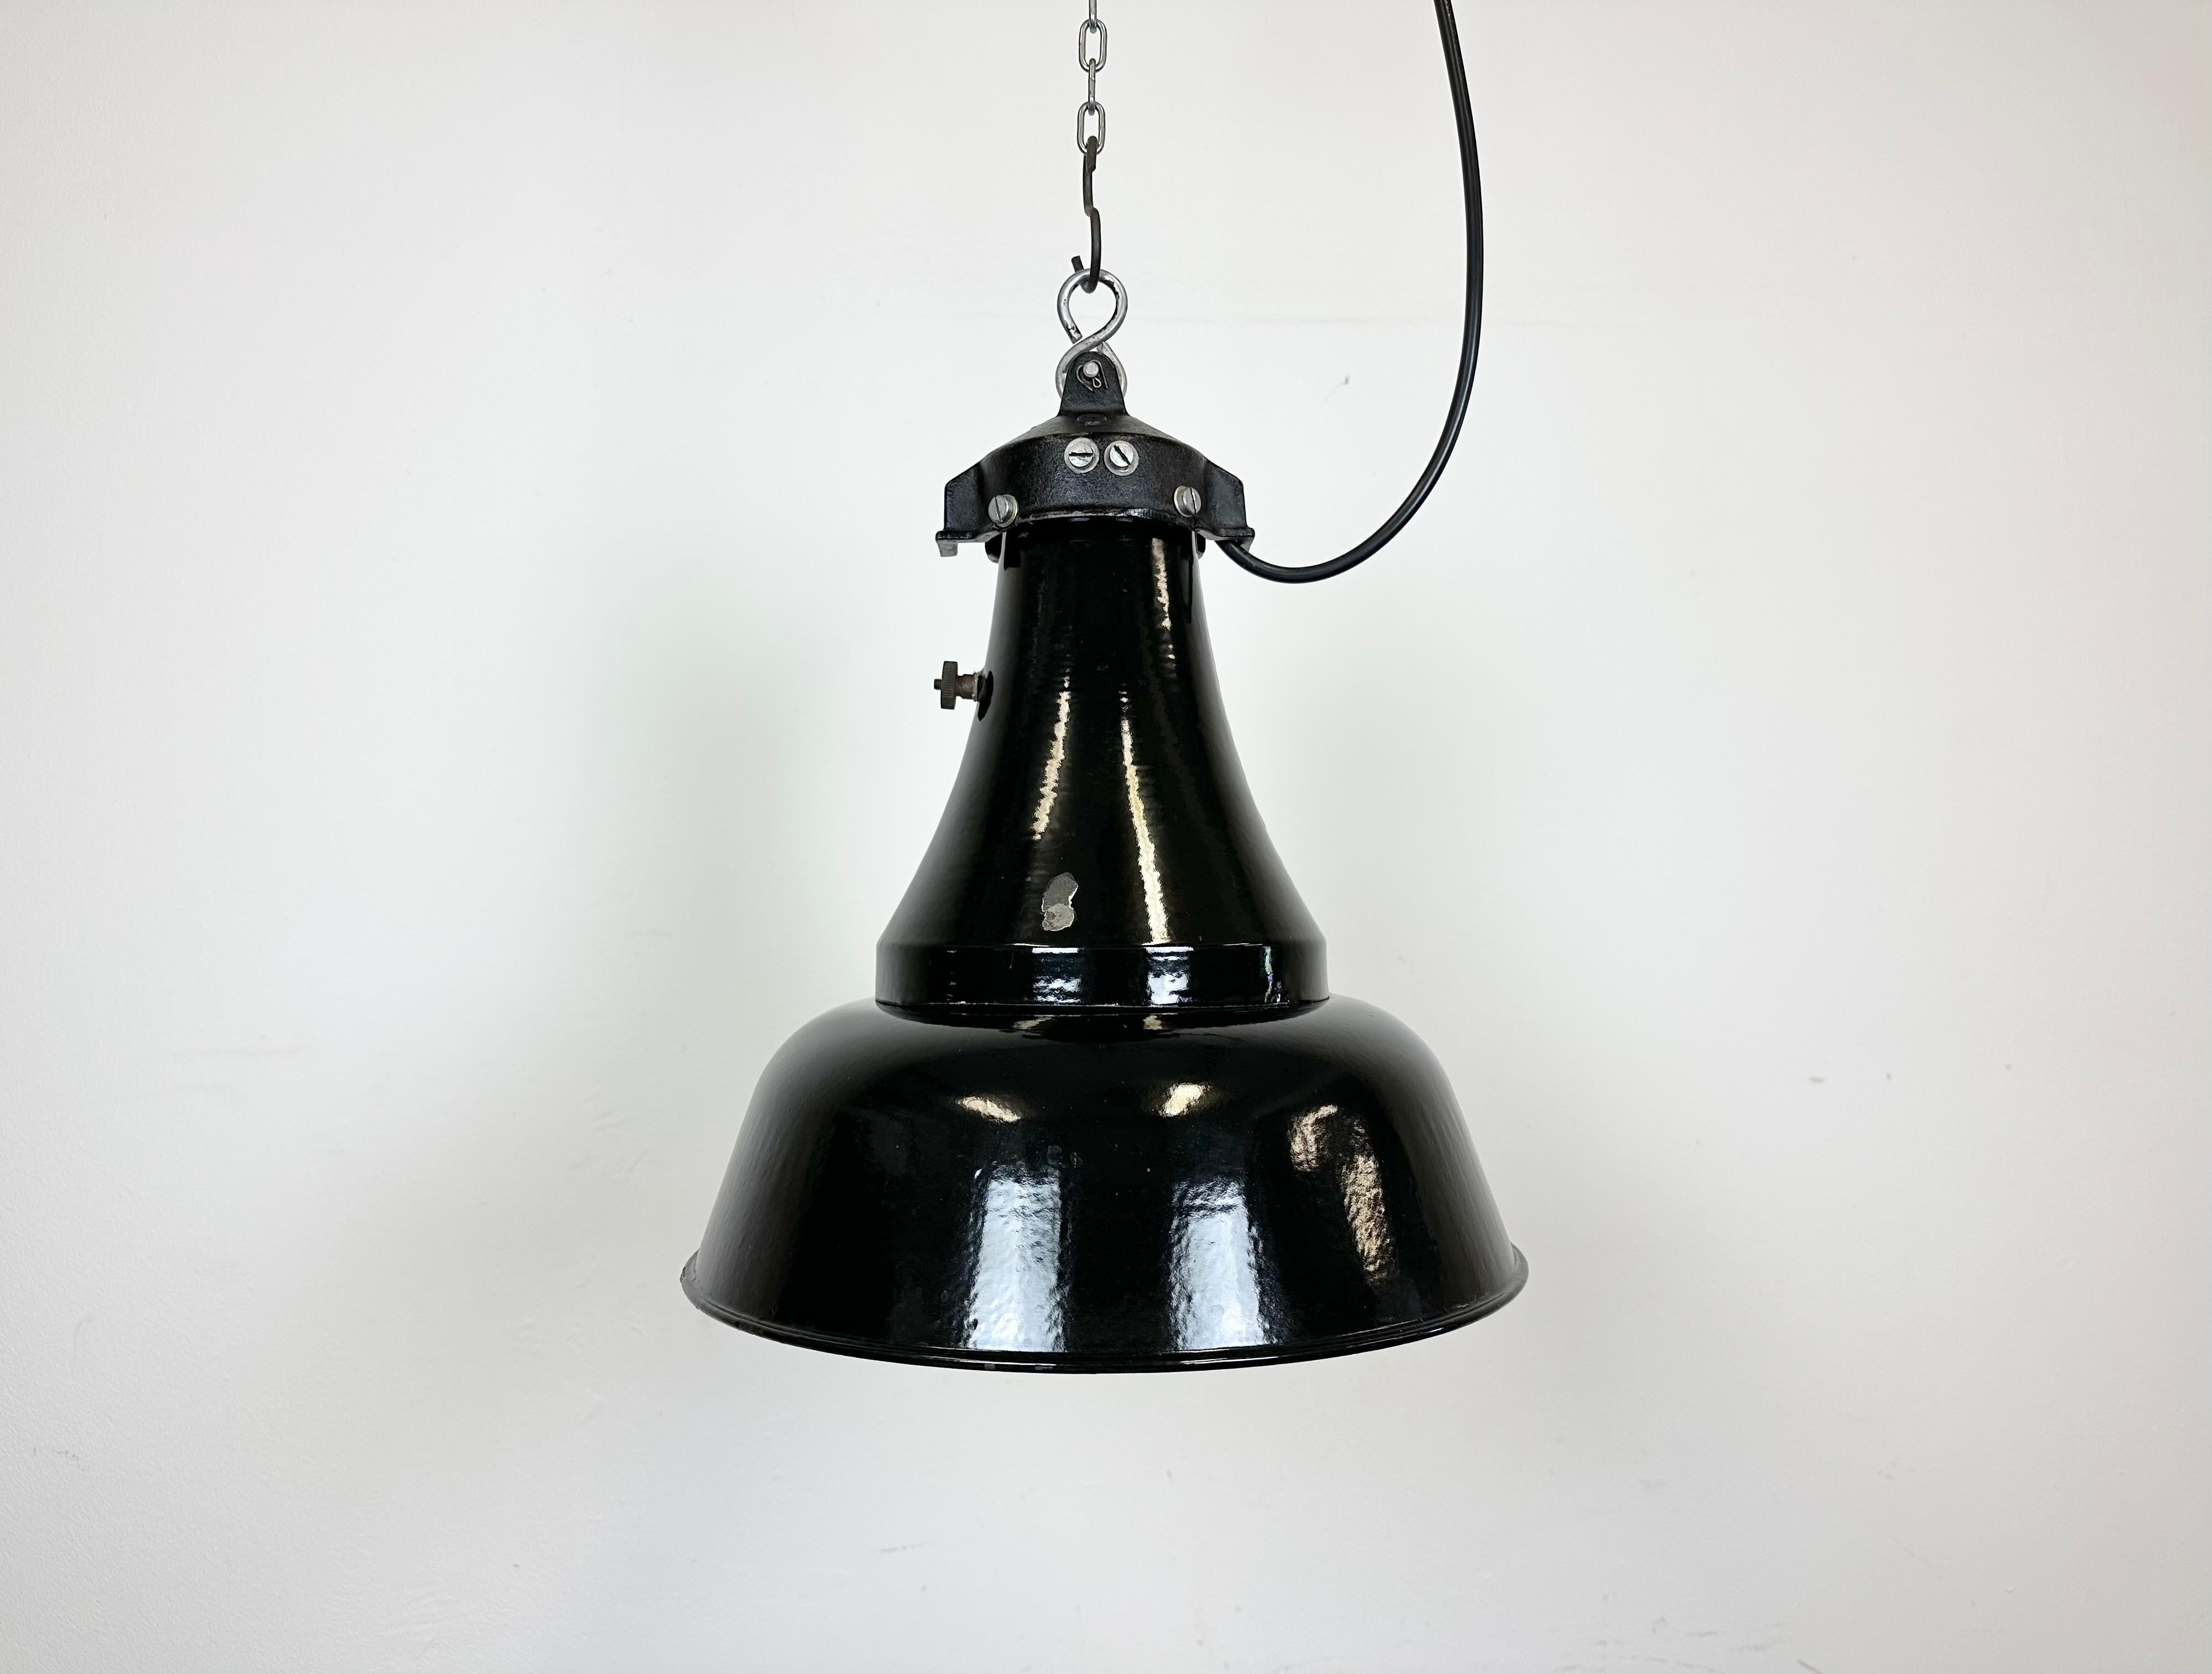 Vintage Industrial black enamel pendant lamp in Bauhaus style. Used in factories in former Czechoslovakia during the 1930s. White enamel interior. Cast iron top.The socket requires E27/ E26 lightbulbs.New wire. Measures: Lampshade diameter 32 cm.